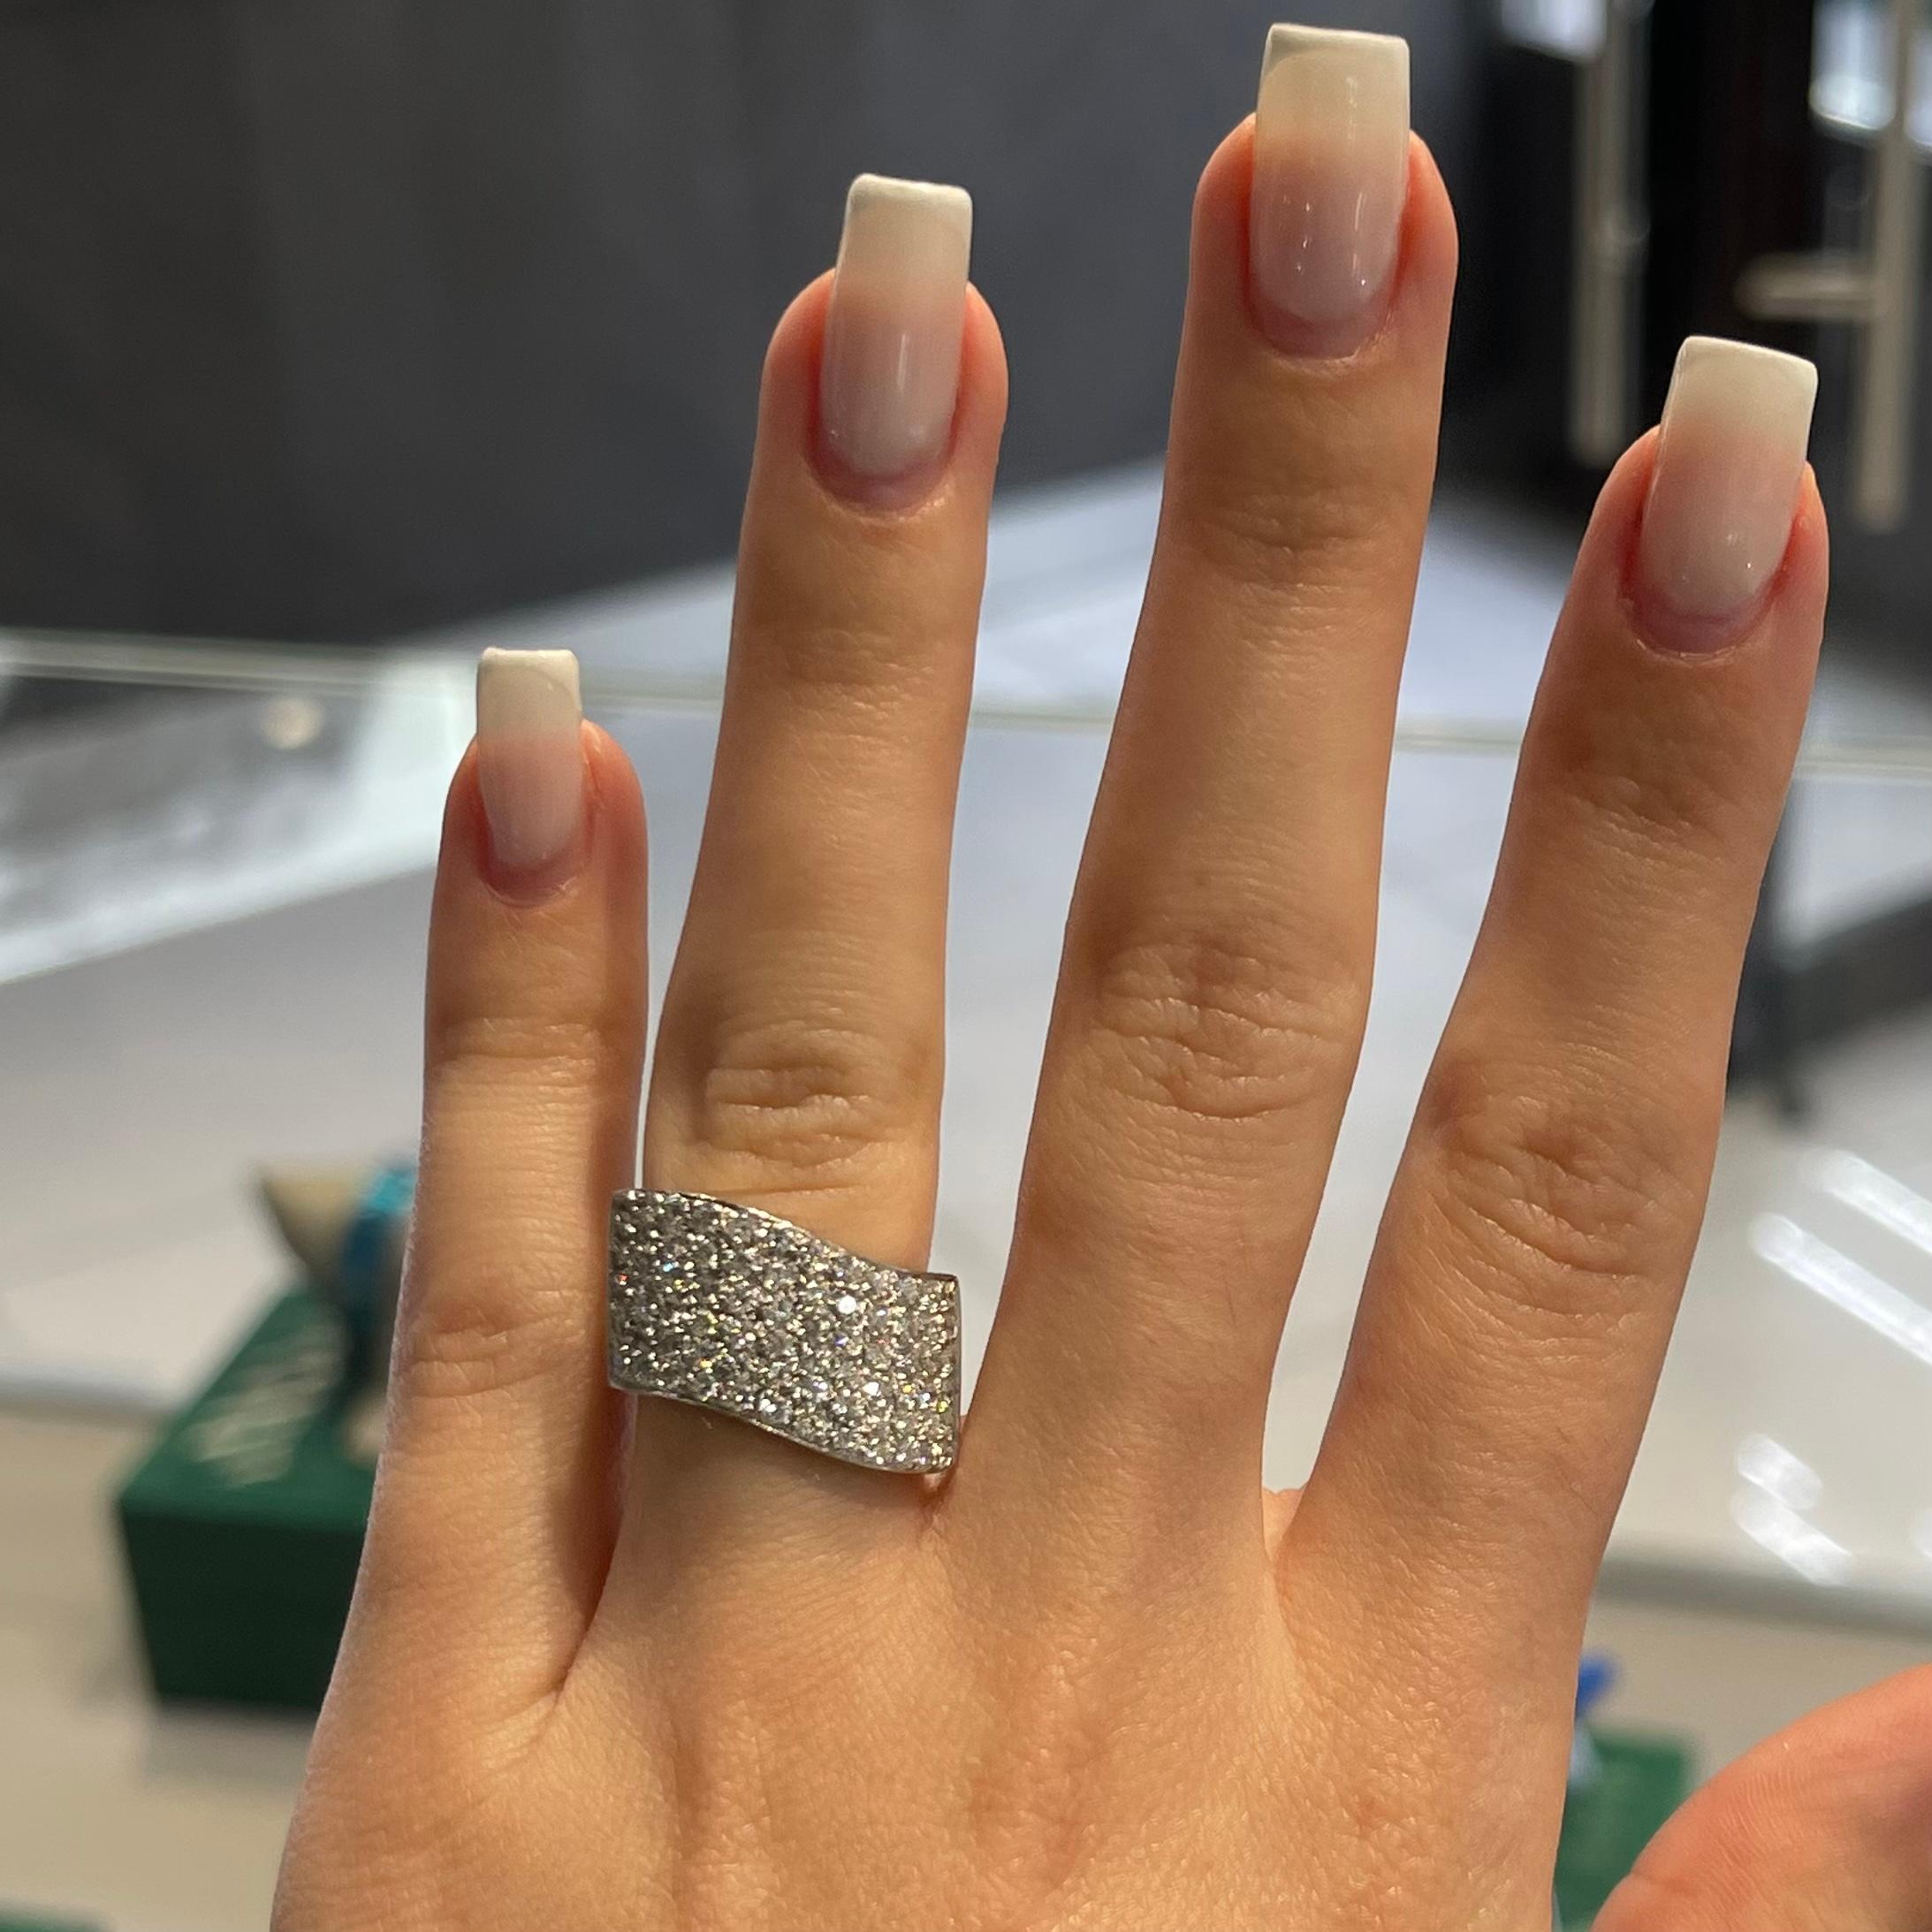 1.08 Carat Diamond Cocktail Ring in 18k White Gold 'Sizable' For Sale 1